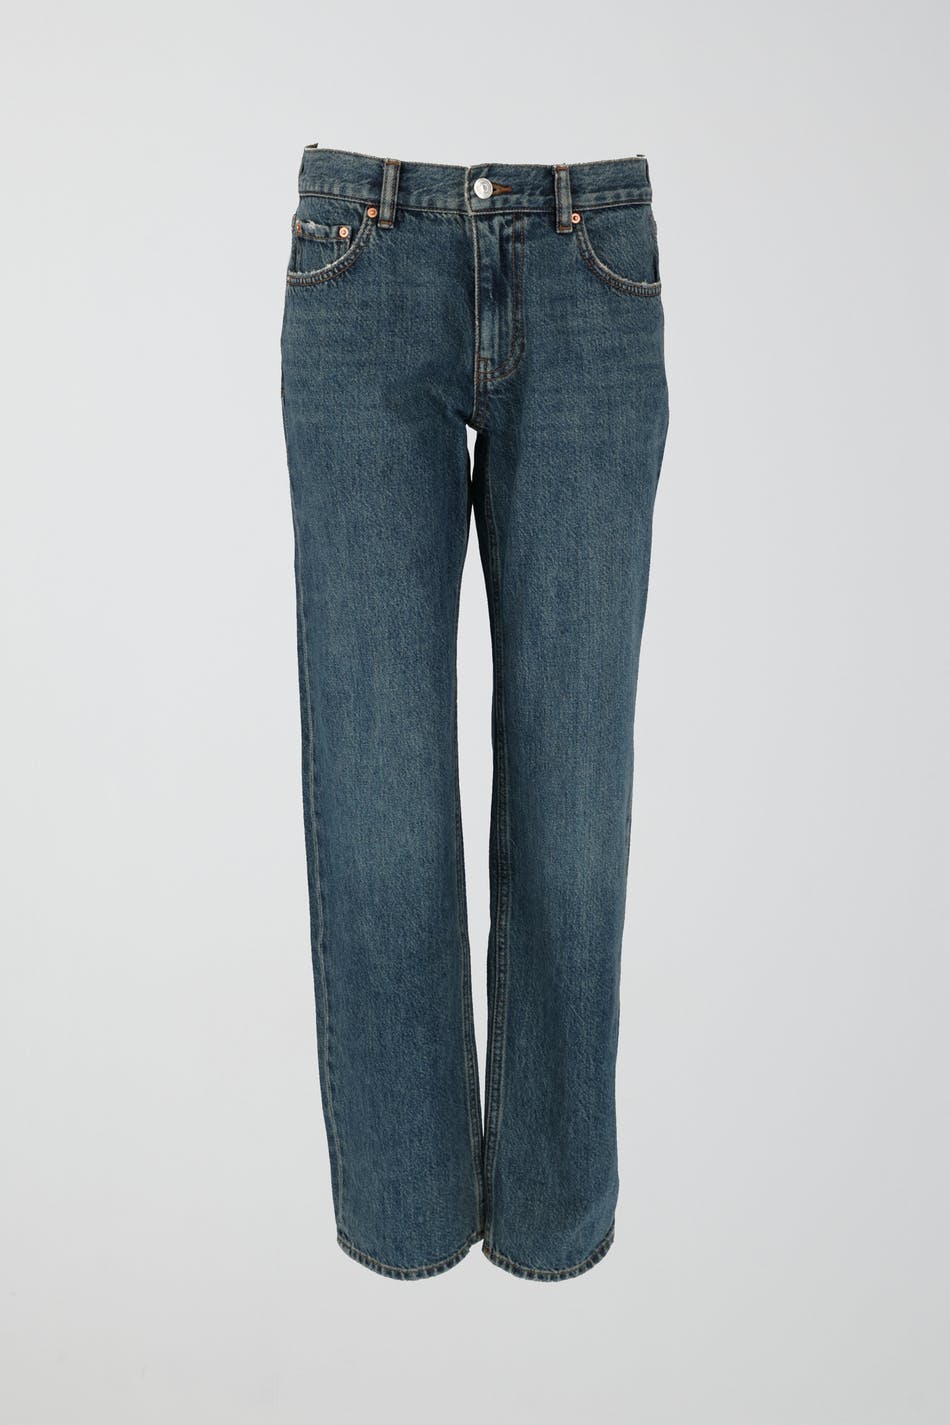 Gina Tricot - Low straight petite jeans - low-straight-jeans - Blue - 40 - Female